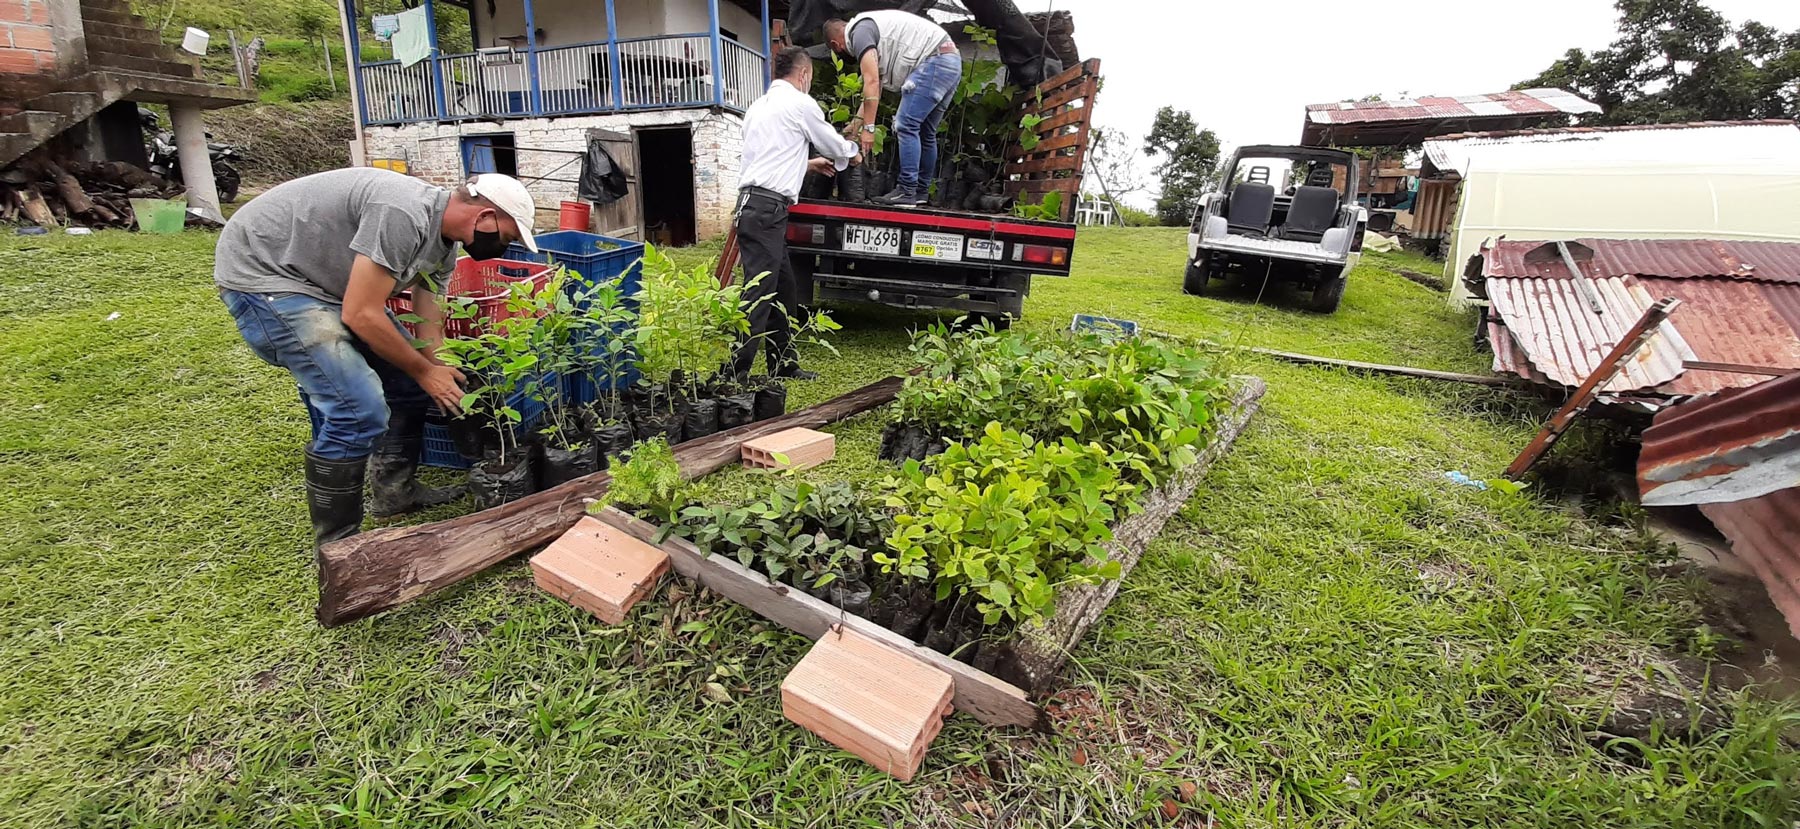 Farmer training in Colombia to increase economic and
environmental sustainability